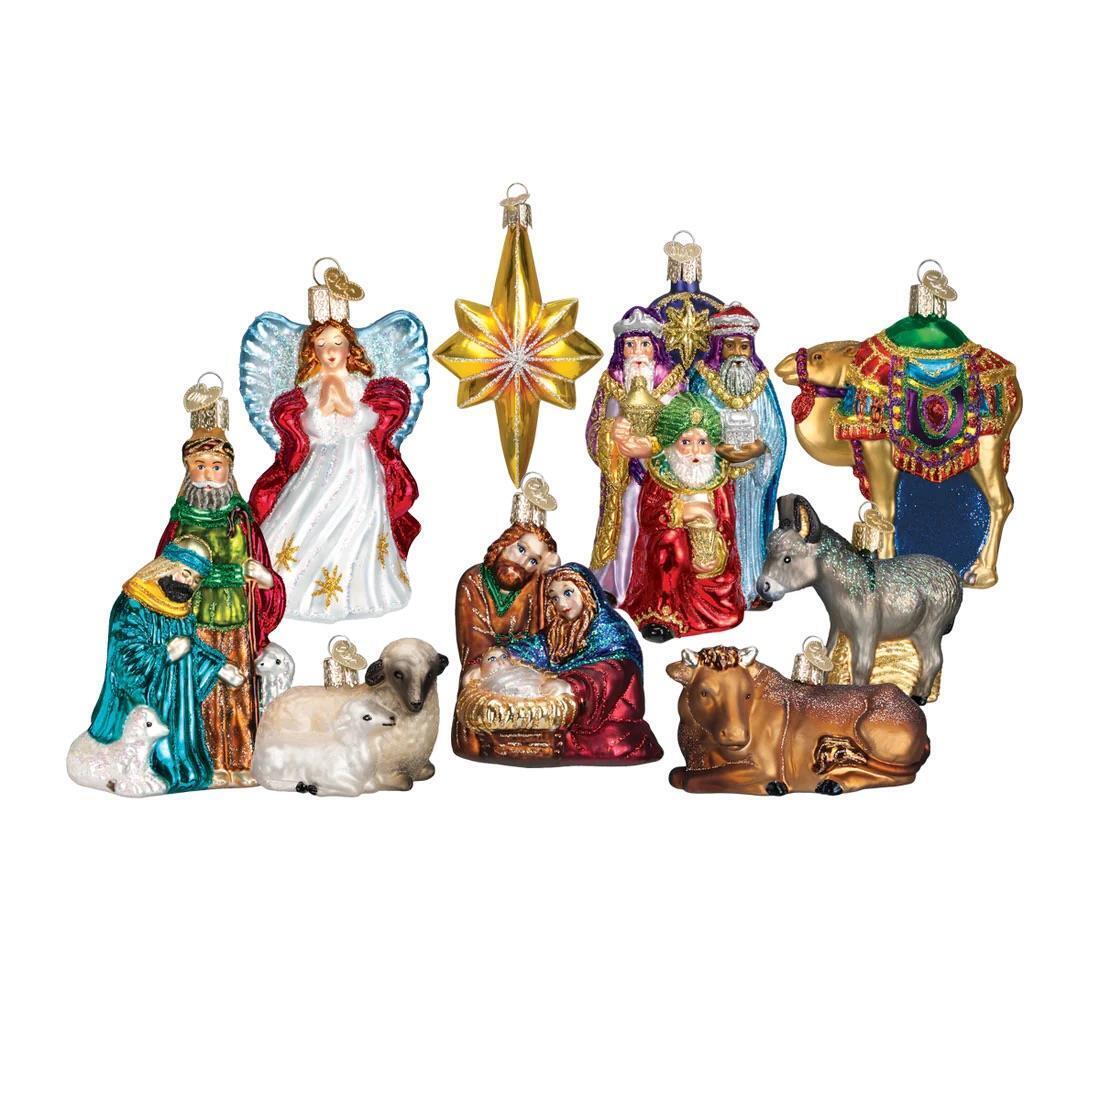 Old World Christmas Nativity Collection Hanging Ornaments, Set of 9 14020-OWC